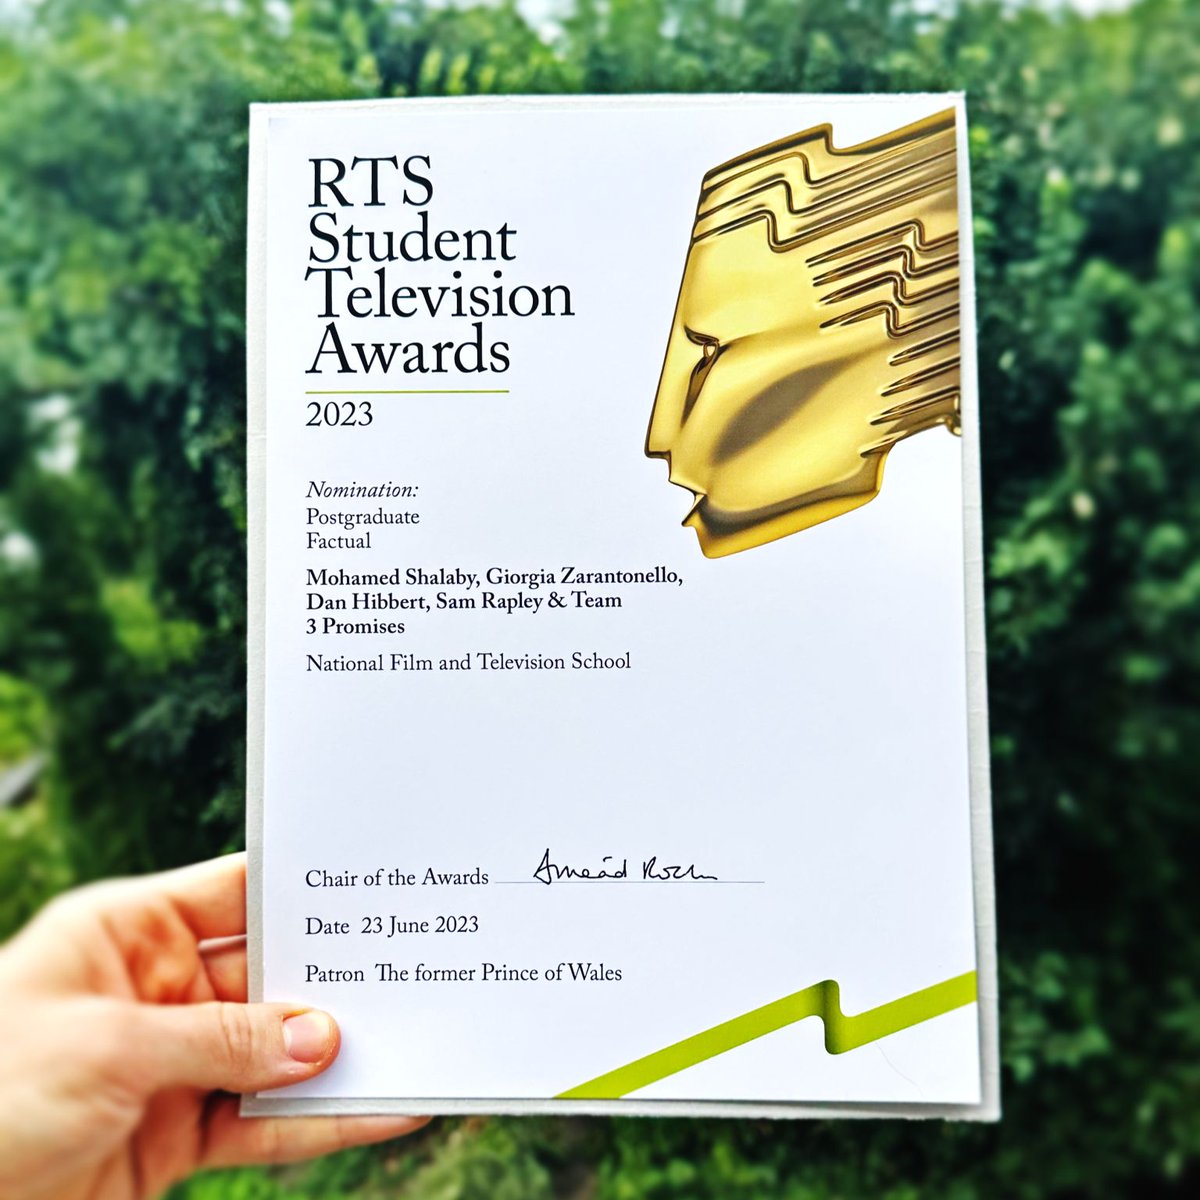 Received this in the mail this week for the @RTS_media Student Awards nomination for our @NFTSFilmTV film '3 Promises'. So pleased and honoured by the recognition and it's an incredible boost to move forward with the next project!